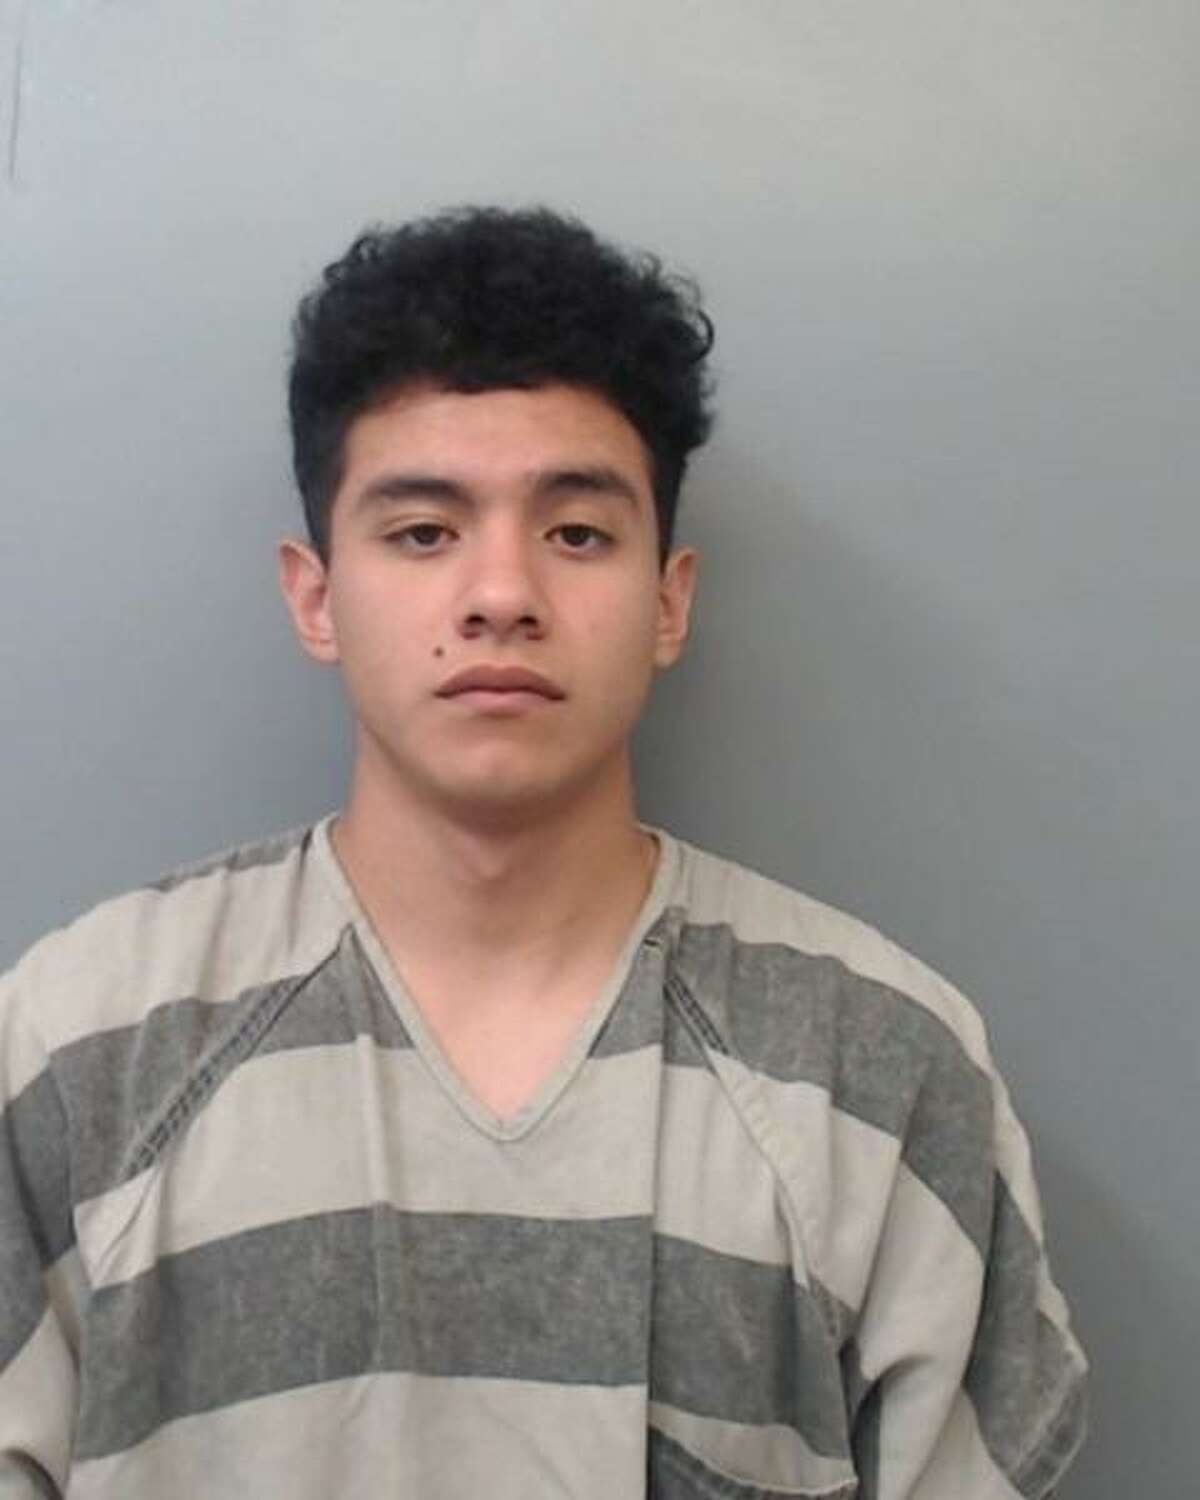 Samuel Enrique Lopez, 19, was charged with indecency with a child by sexual contact.